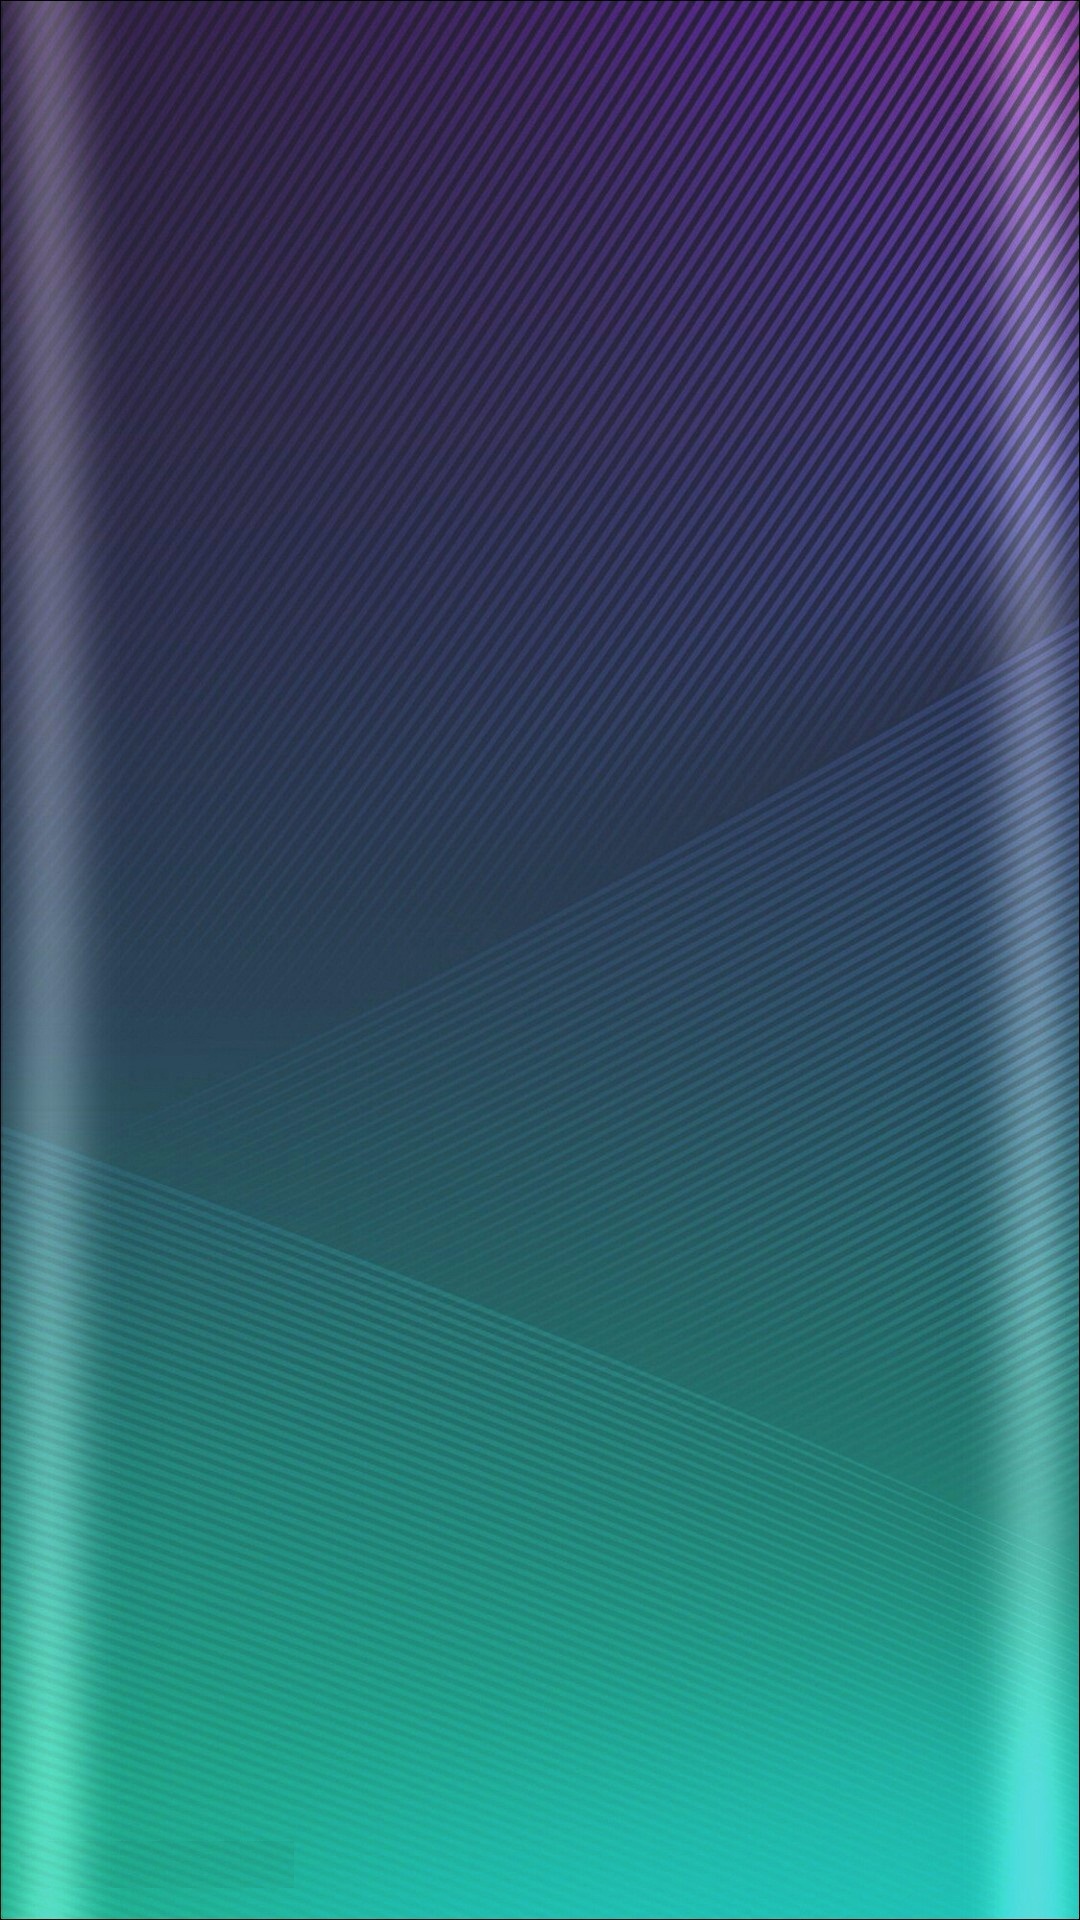 Teal Color Wallpaper Android   2021 Android Wallpapers